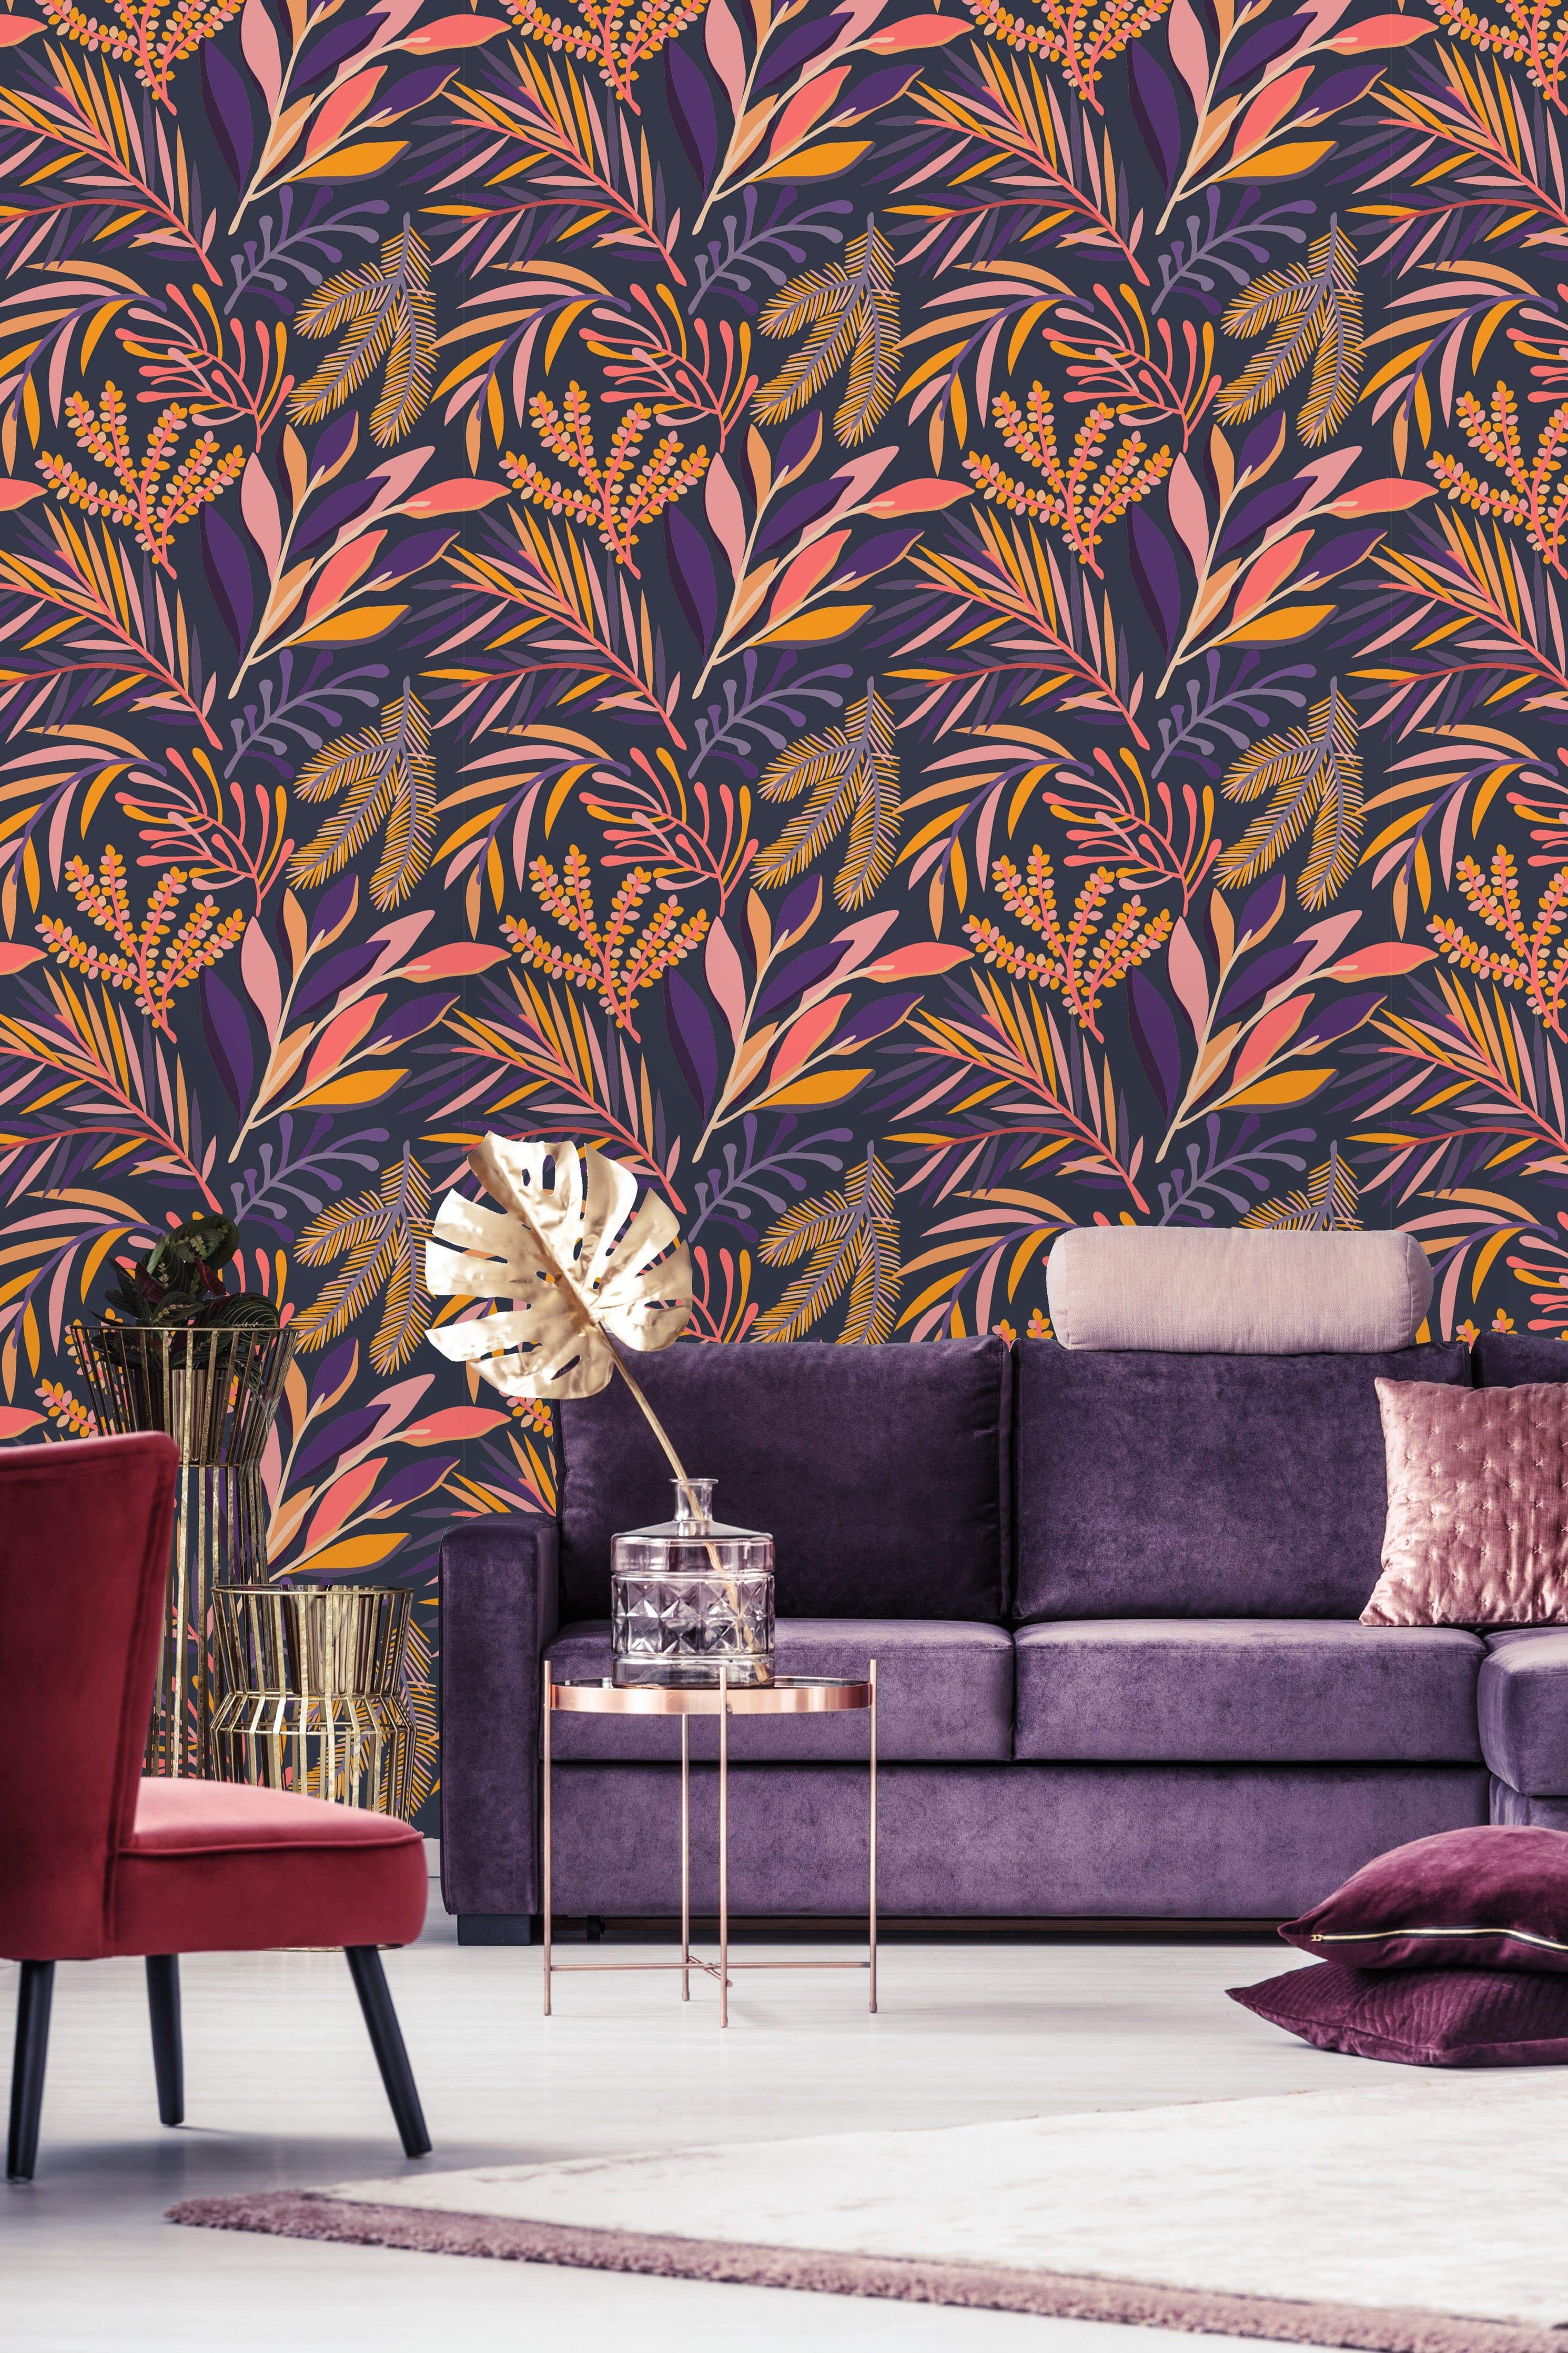 Floral Pattern Wallpaper buy at the best price with delivery – uniqstiq